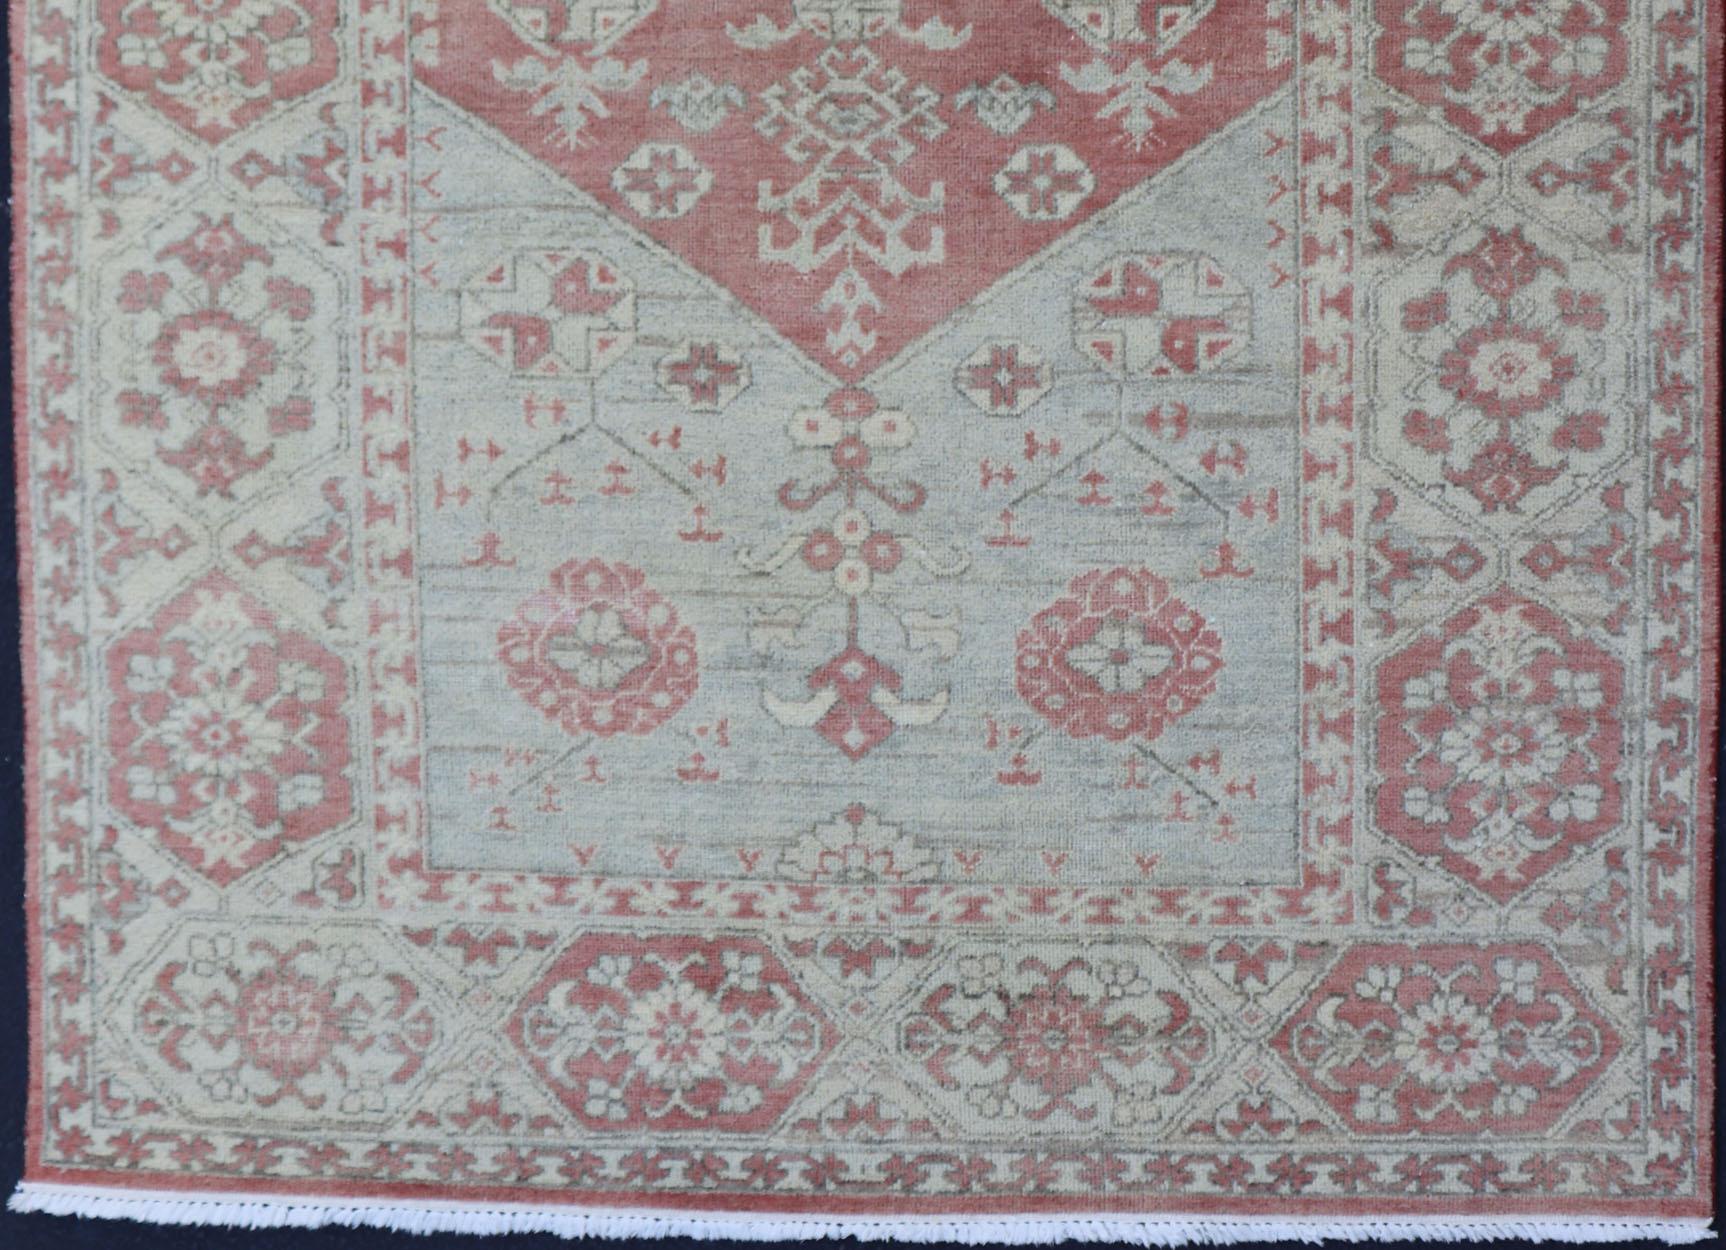 Keivan Woven Arts Oushak Rug in Light Blue and Coral   5'10 x 8'10 In Excellent Condition For Sale In Atlanta, GA